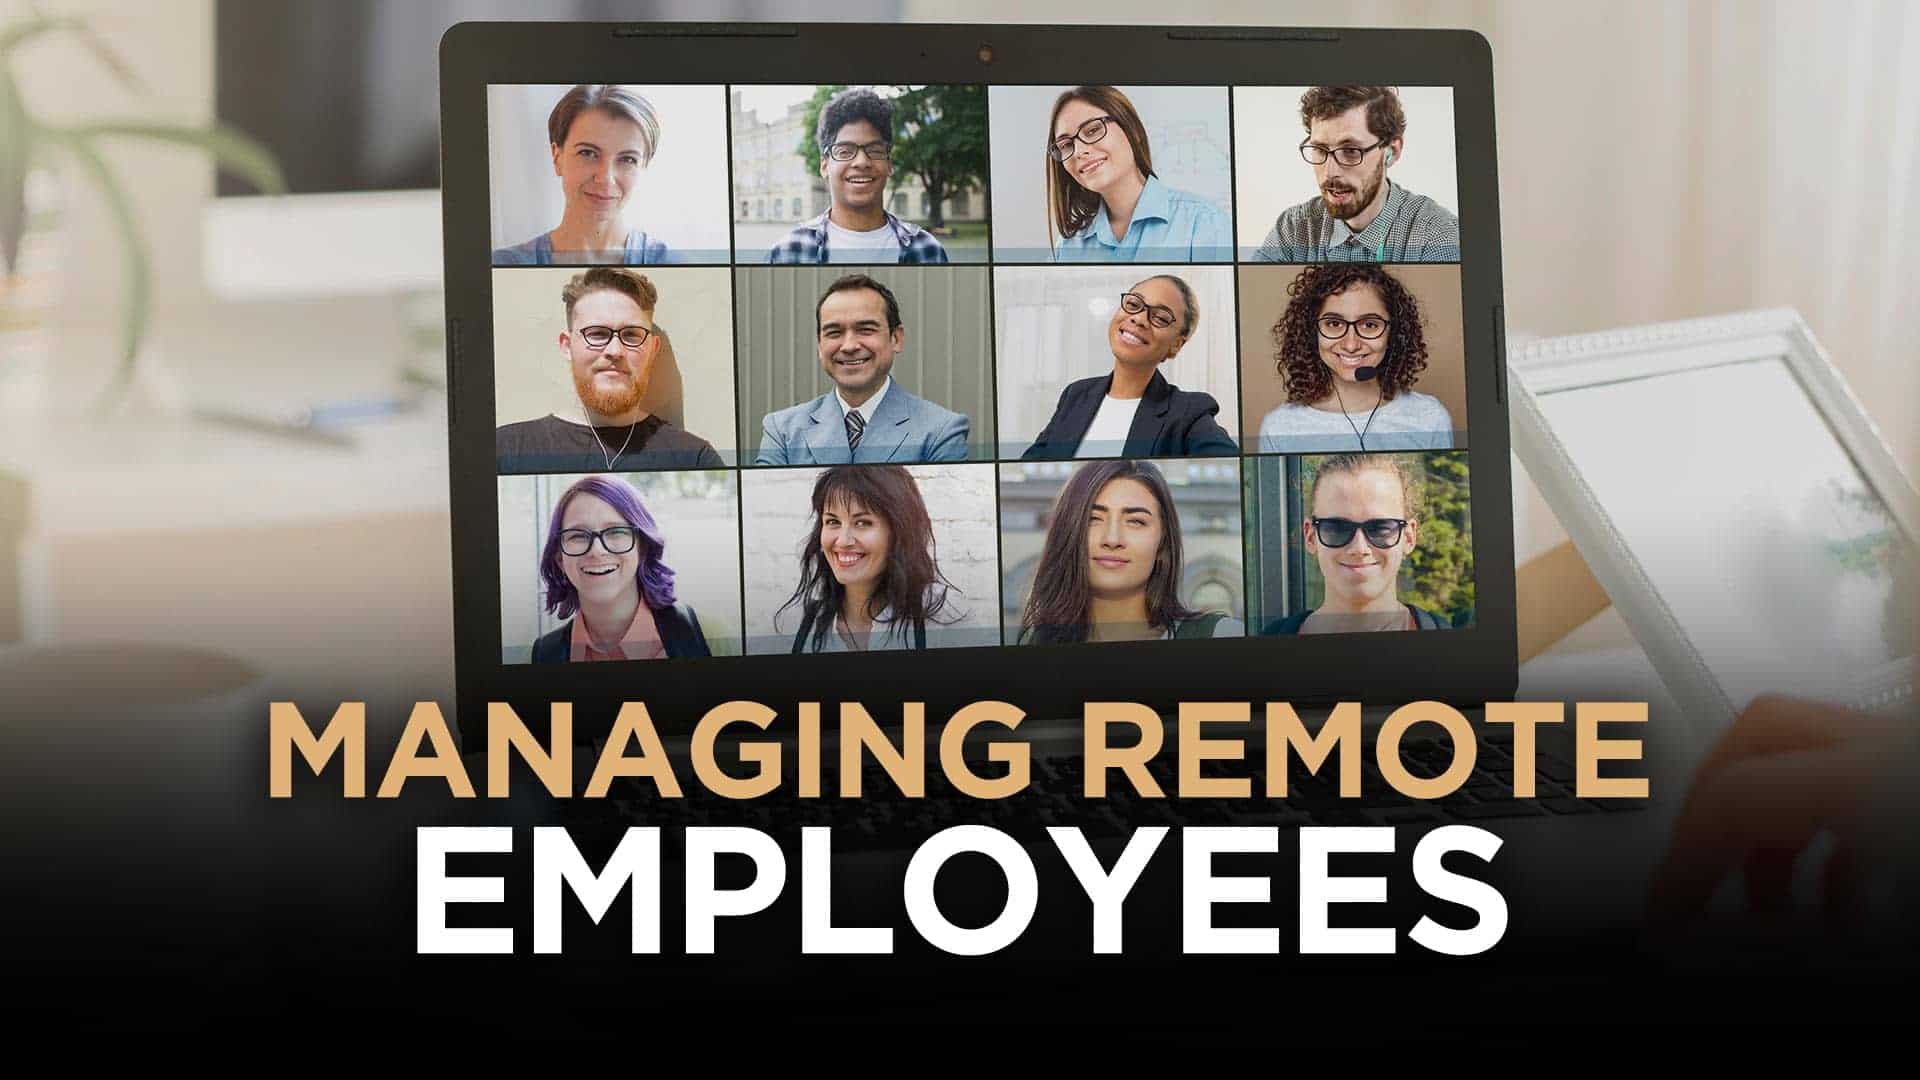 Managing Remote Employees Challenges, Tools and Best Practices For Productivity